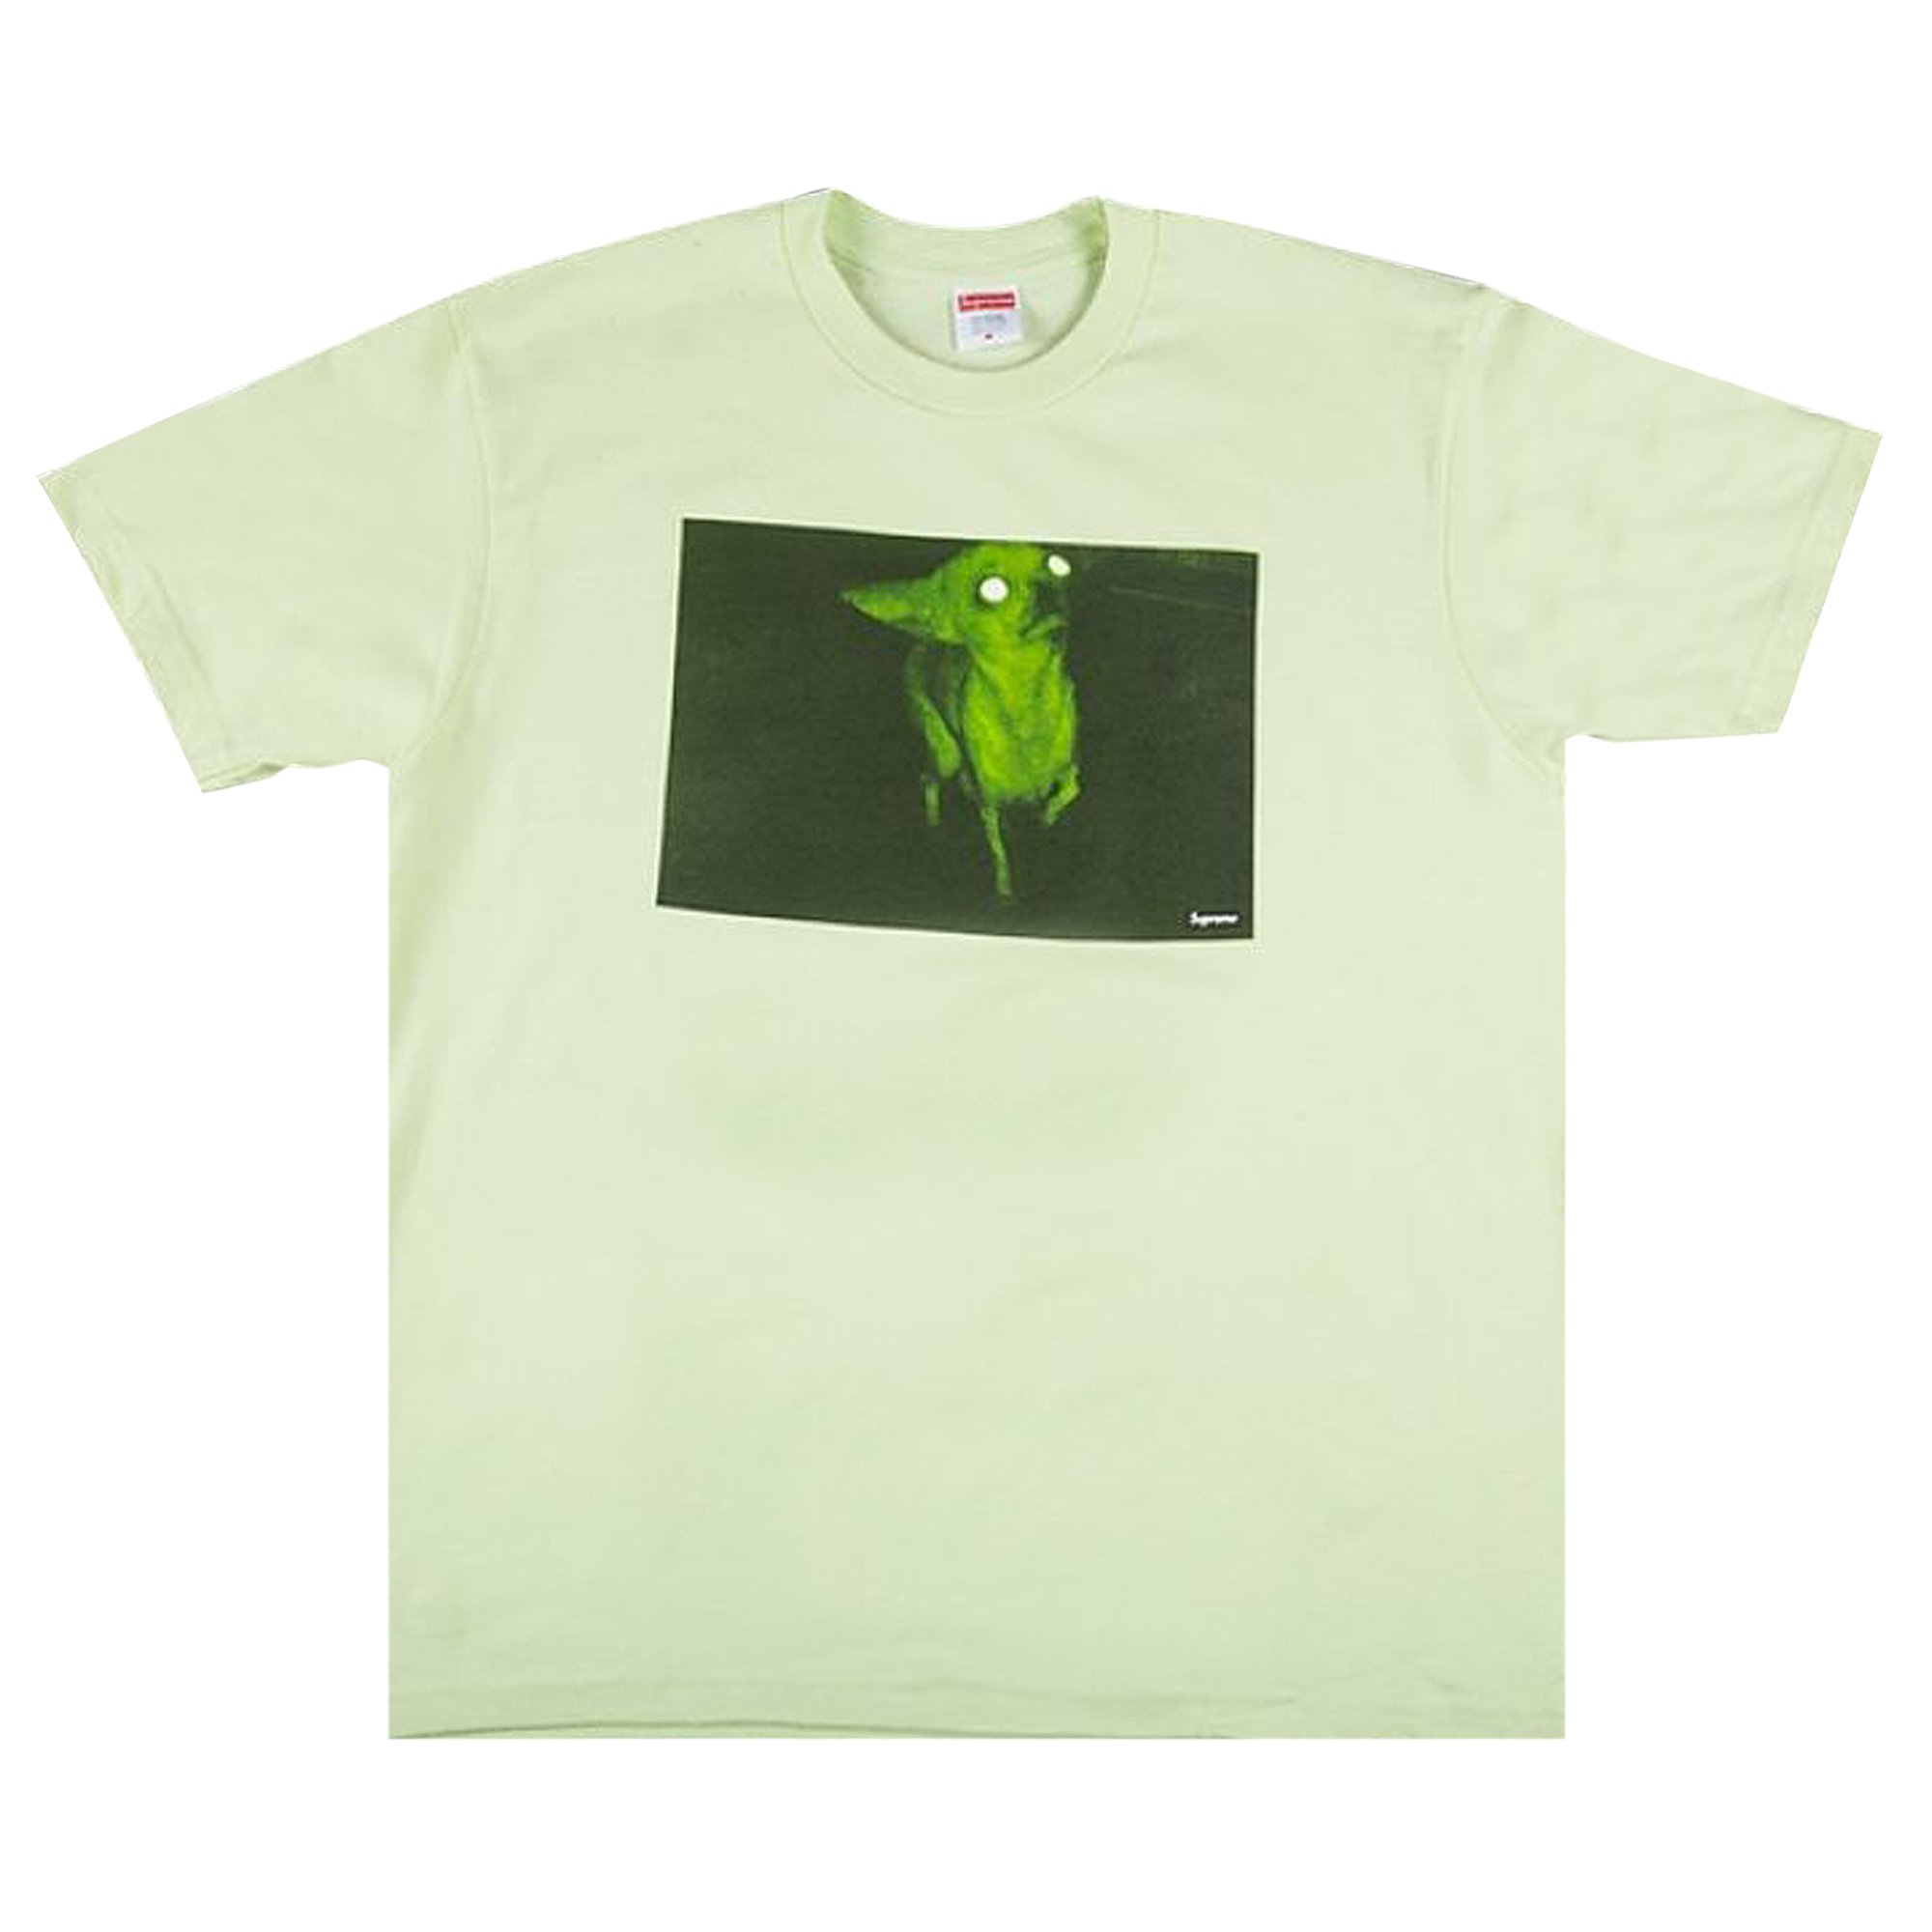 Buy Supreme Chris Cunningham Chihuahua Tee 'Pale Mint' - FW18T17